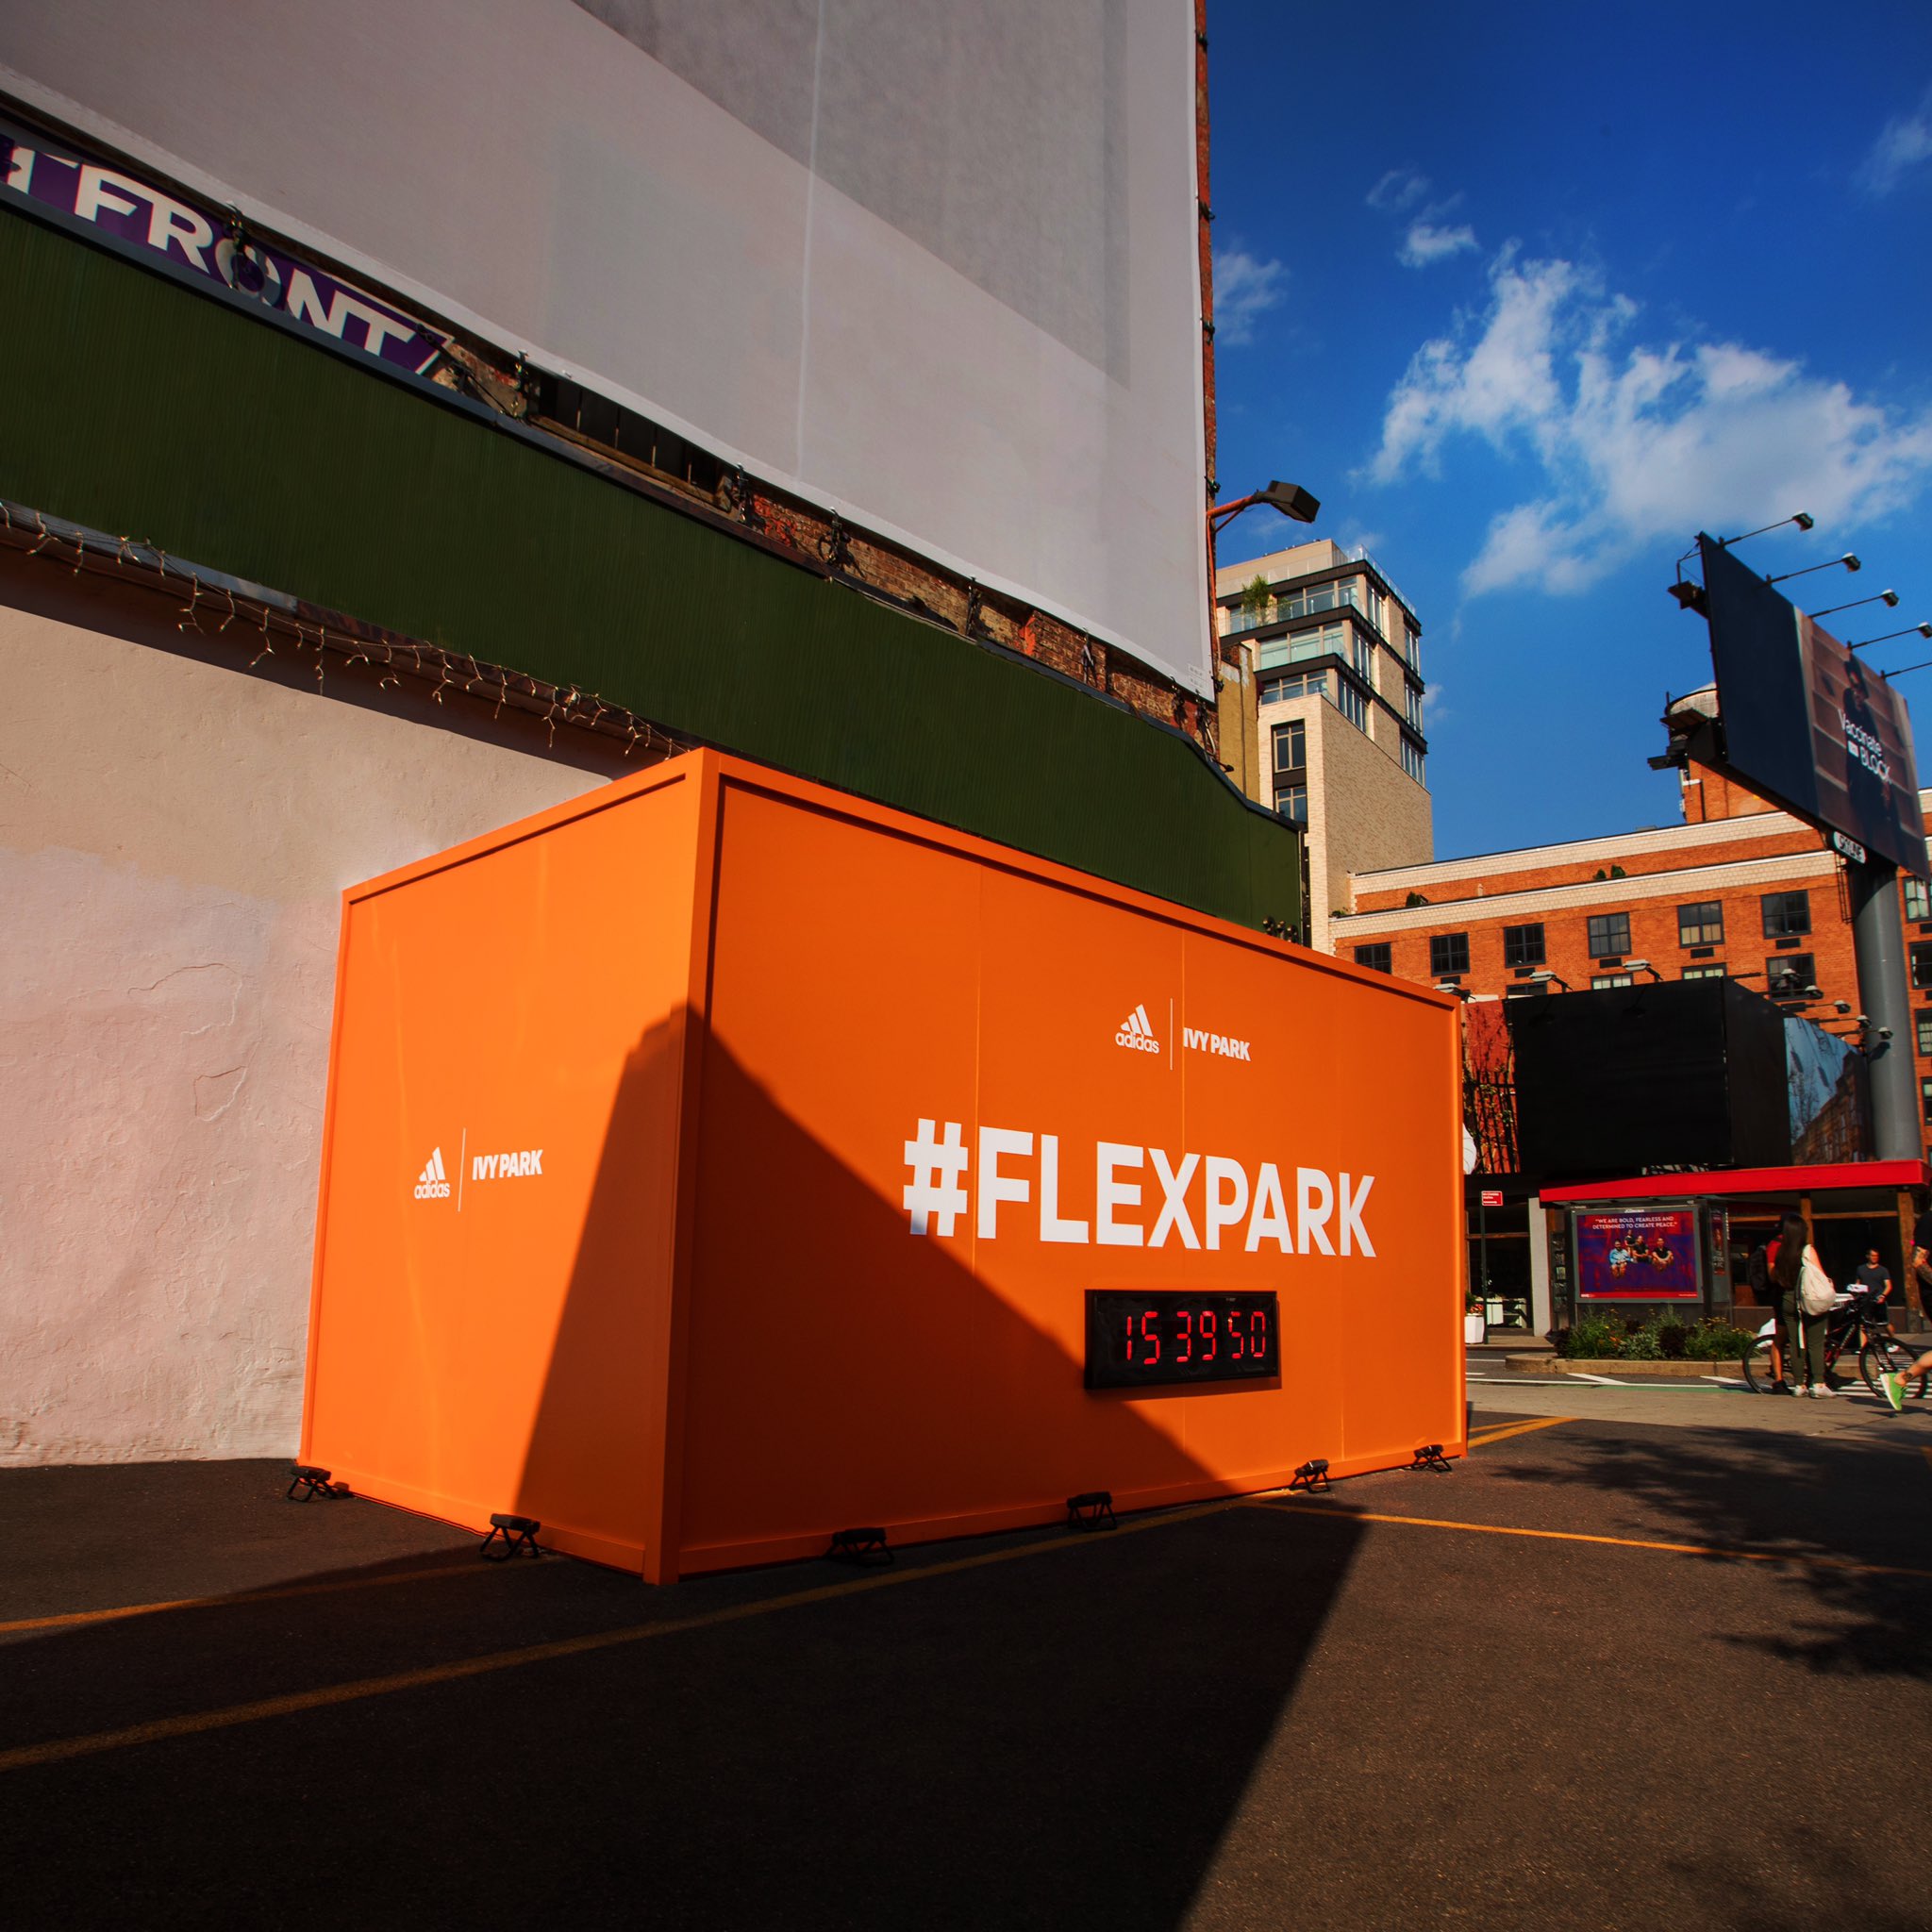 adidas NYC on Twitter: "HOW DO YOU FLEX? 💪 Show the world how you flex at  the #FLEXPARK popup at Houston &amp; Lafayette St. for a chance to win the  exclusive FLEX